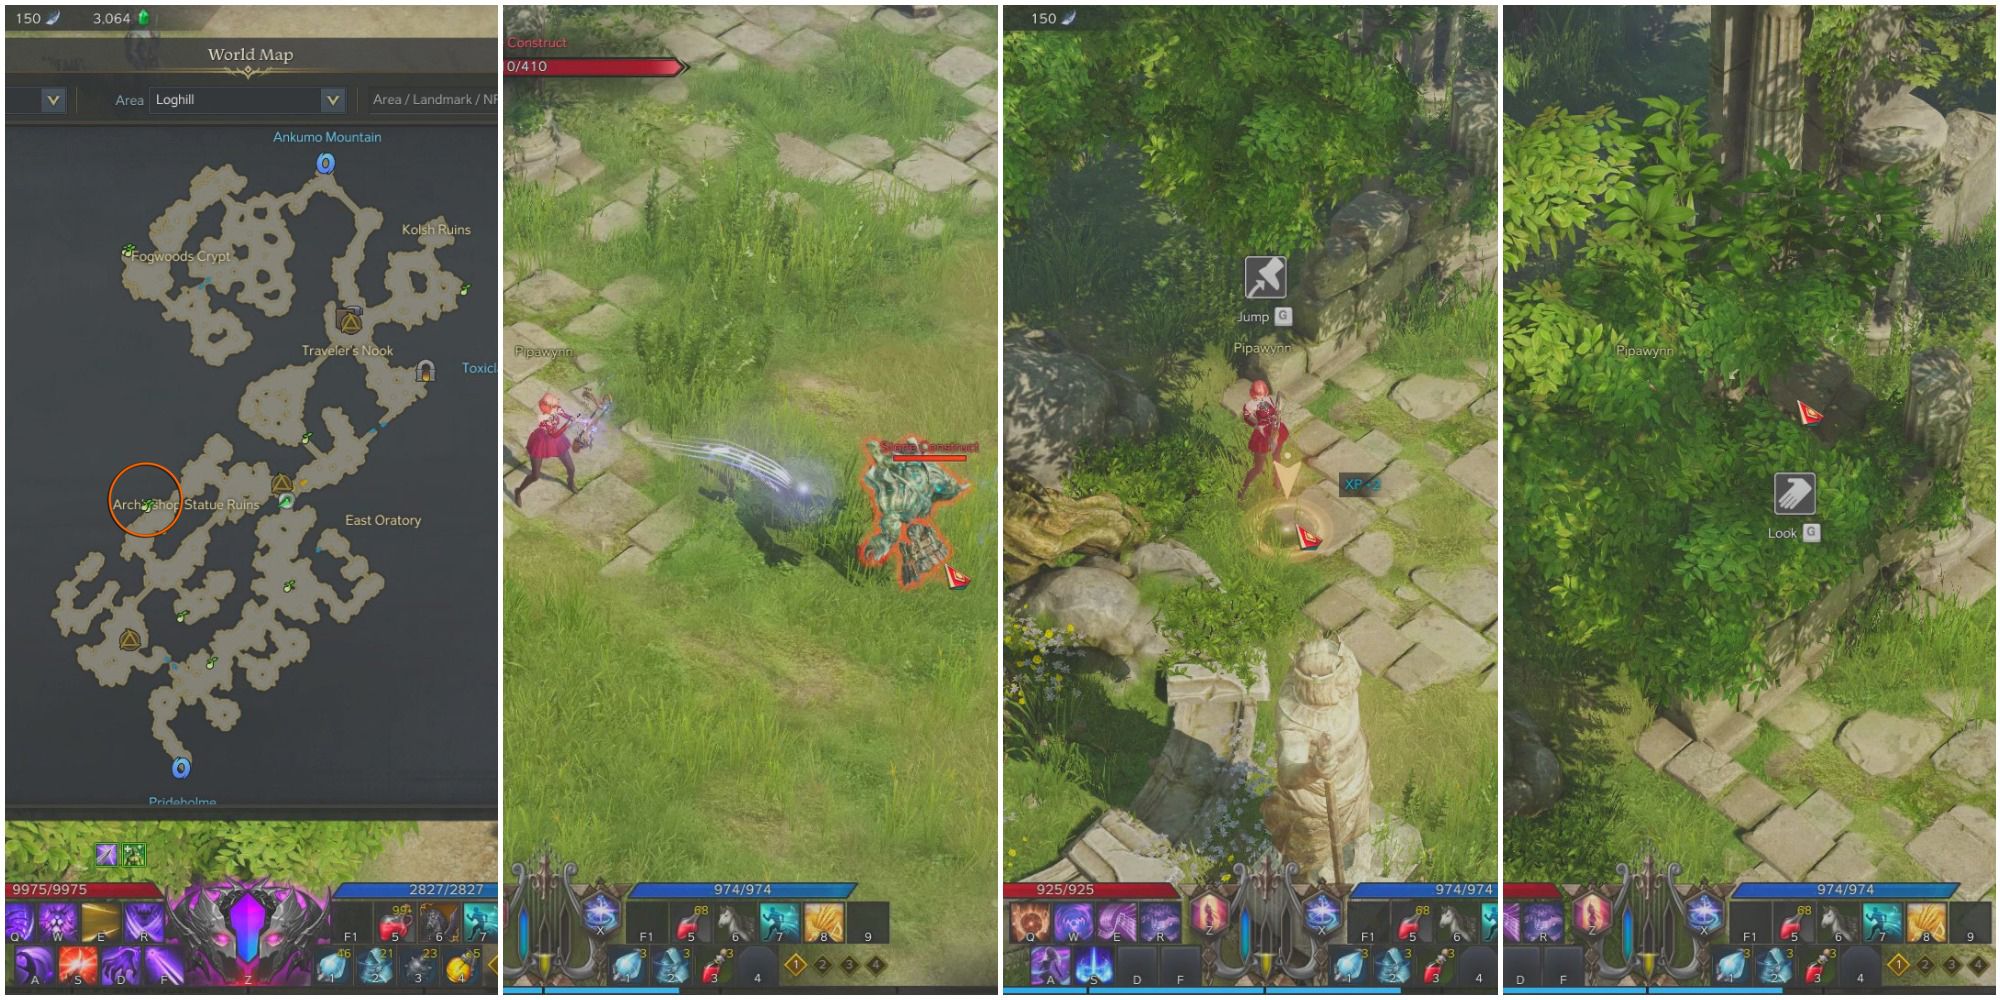 A split image of a map of Loghill, Bard killing a Stone Construct, bard standing on Jump spot, and bard behind ruin wall with "Look" icon